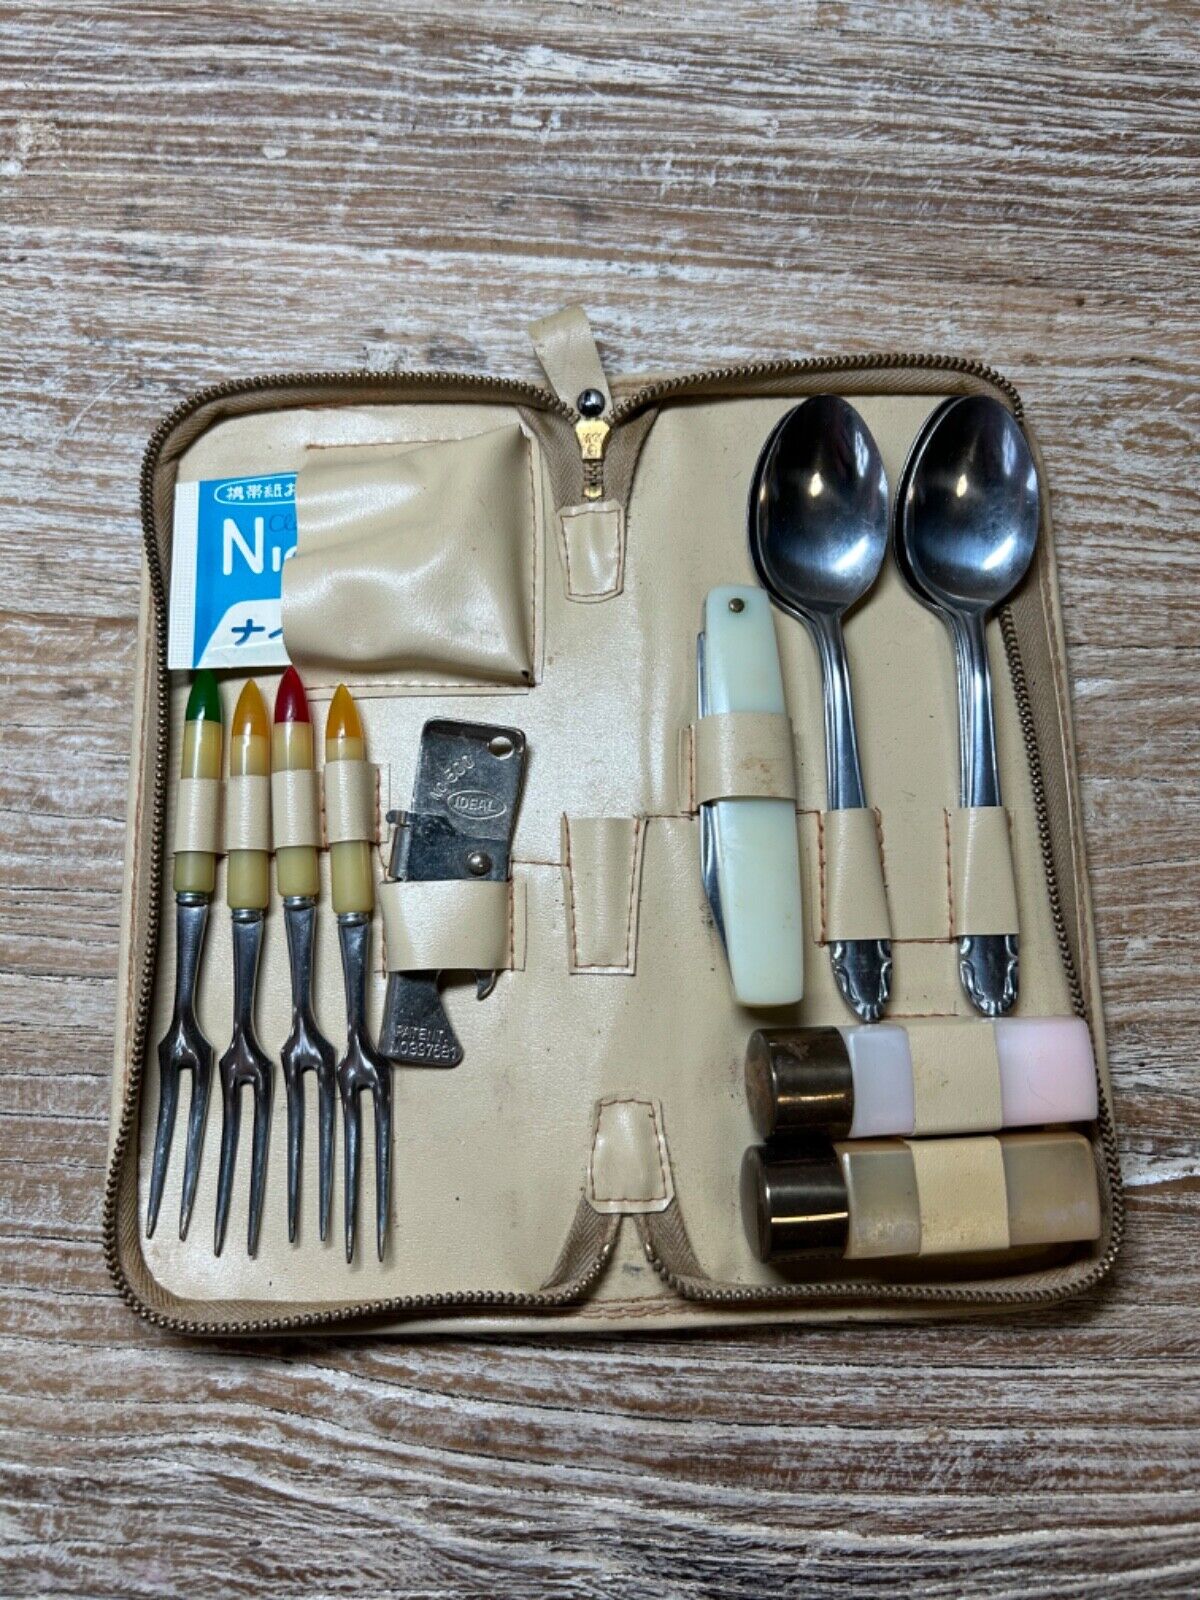 Vintage Travel utensils knife fork spoons can opener etc pouch Stainless Japan